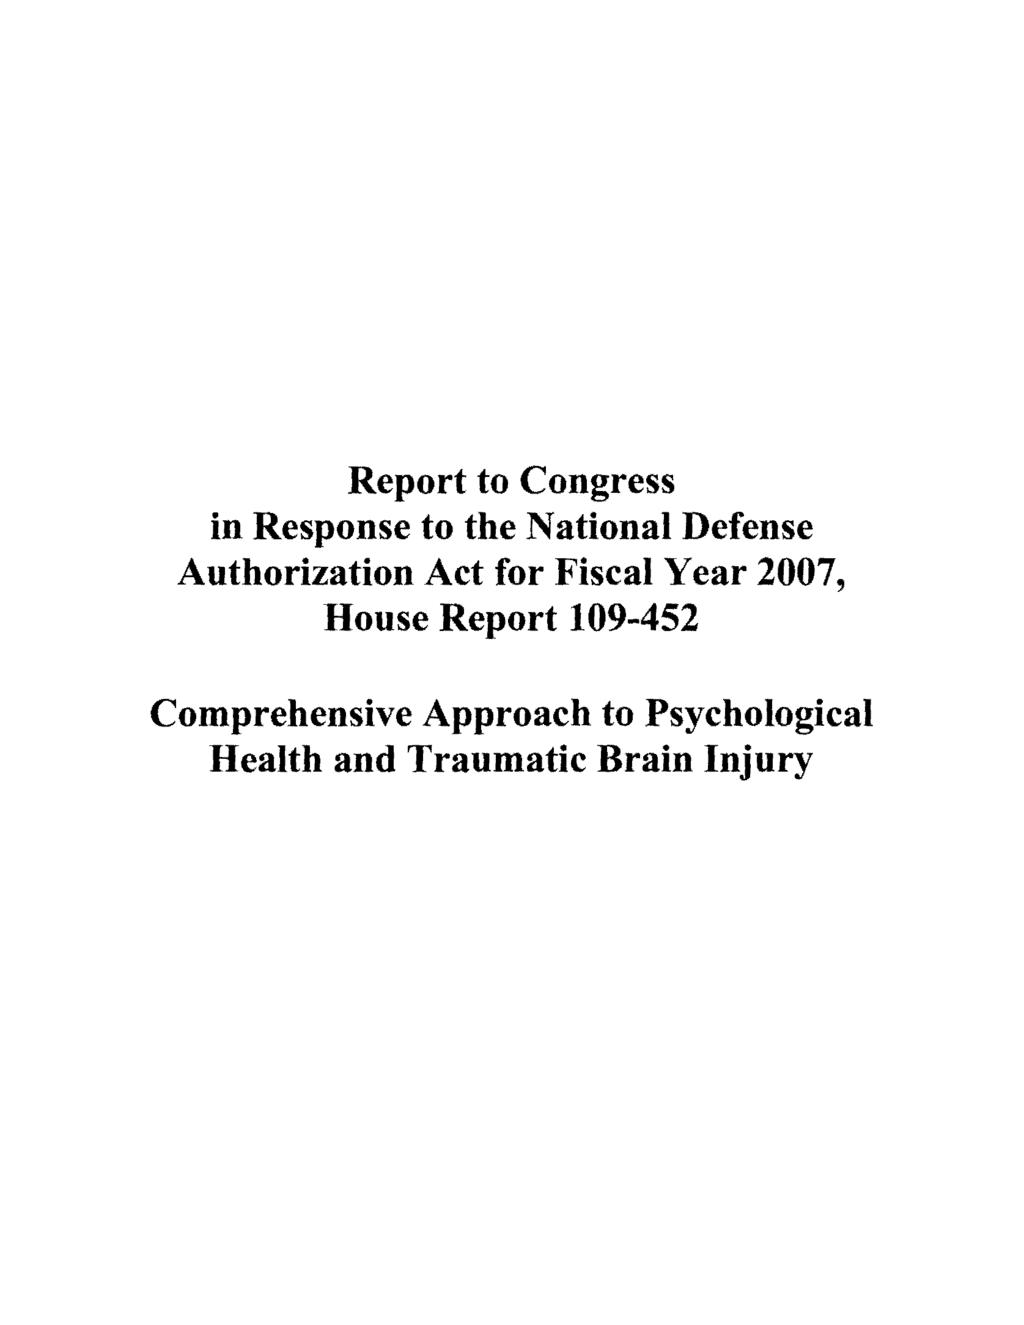 Report to Congress in Response to the National Defense Authorization Act for Fiscal Year 2007,